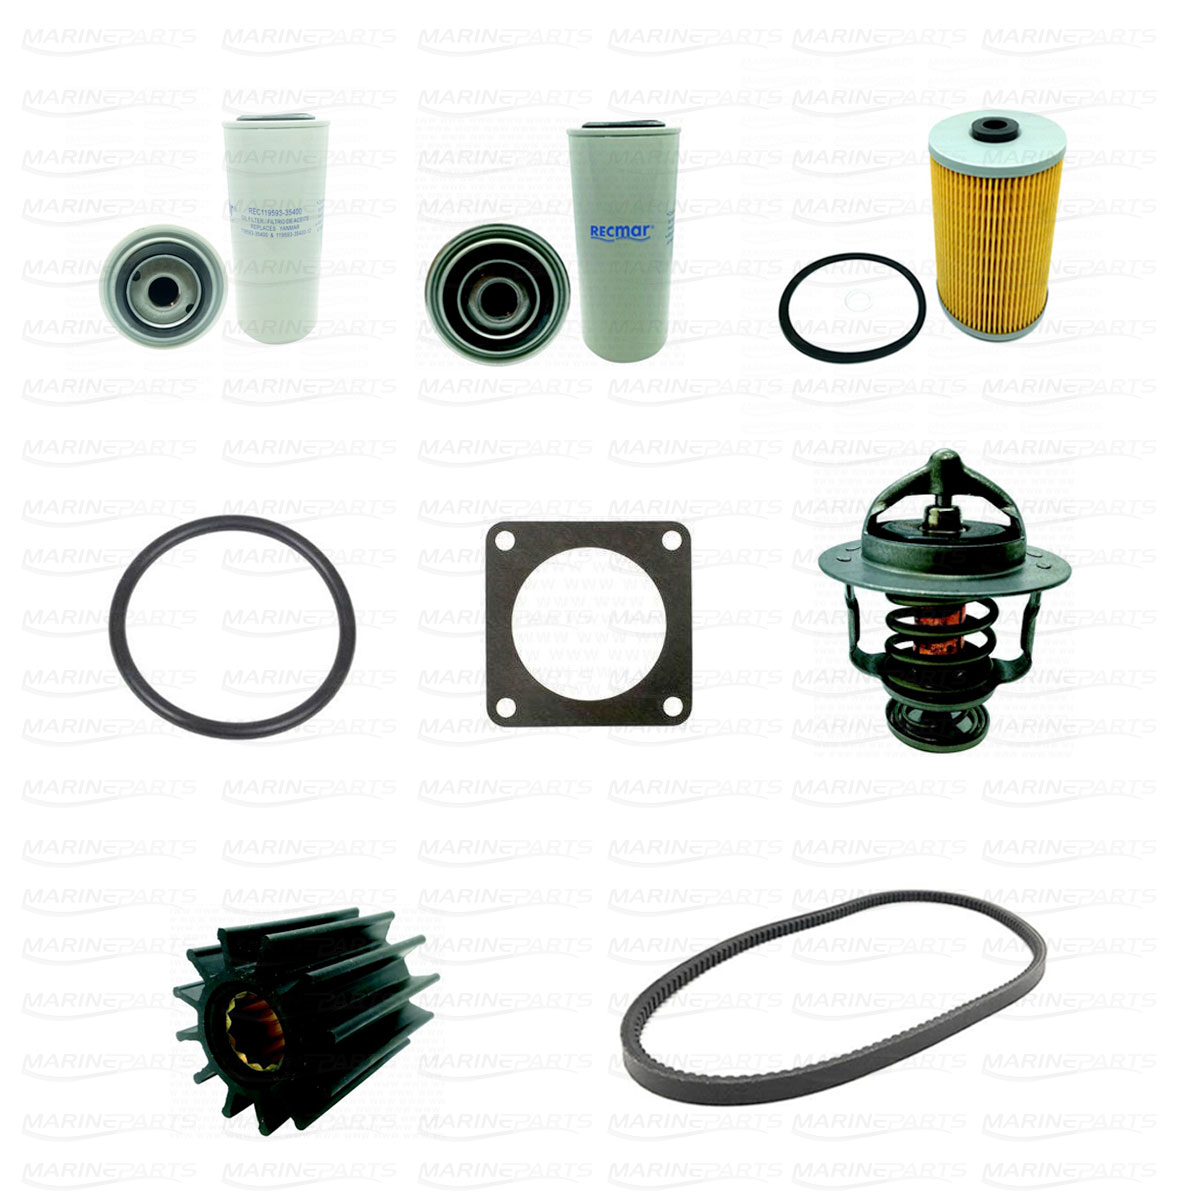 Service Kit for Yanmar 6LY2-STE, 6LY2A-STP